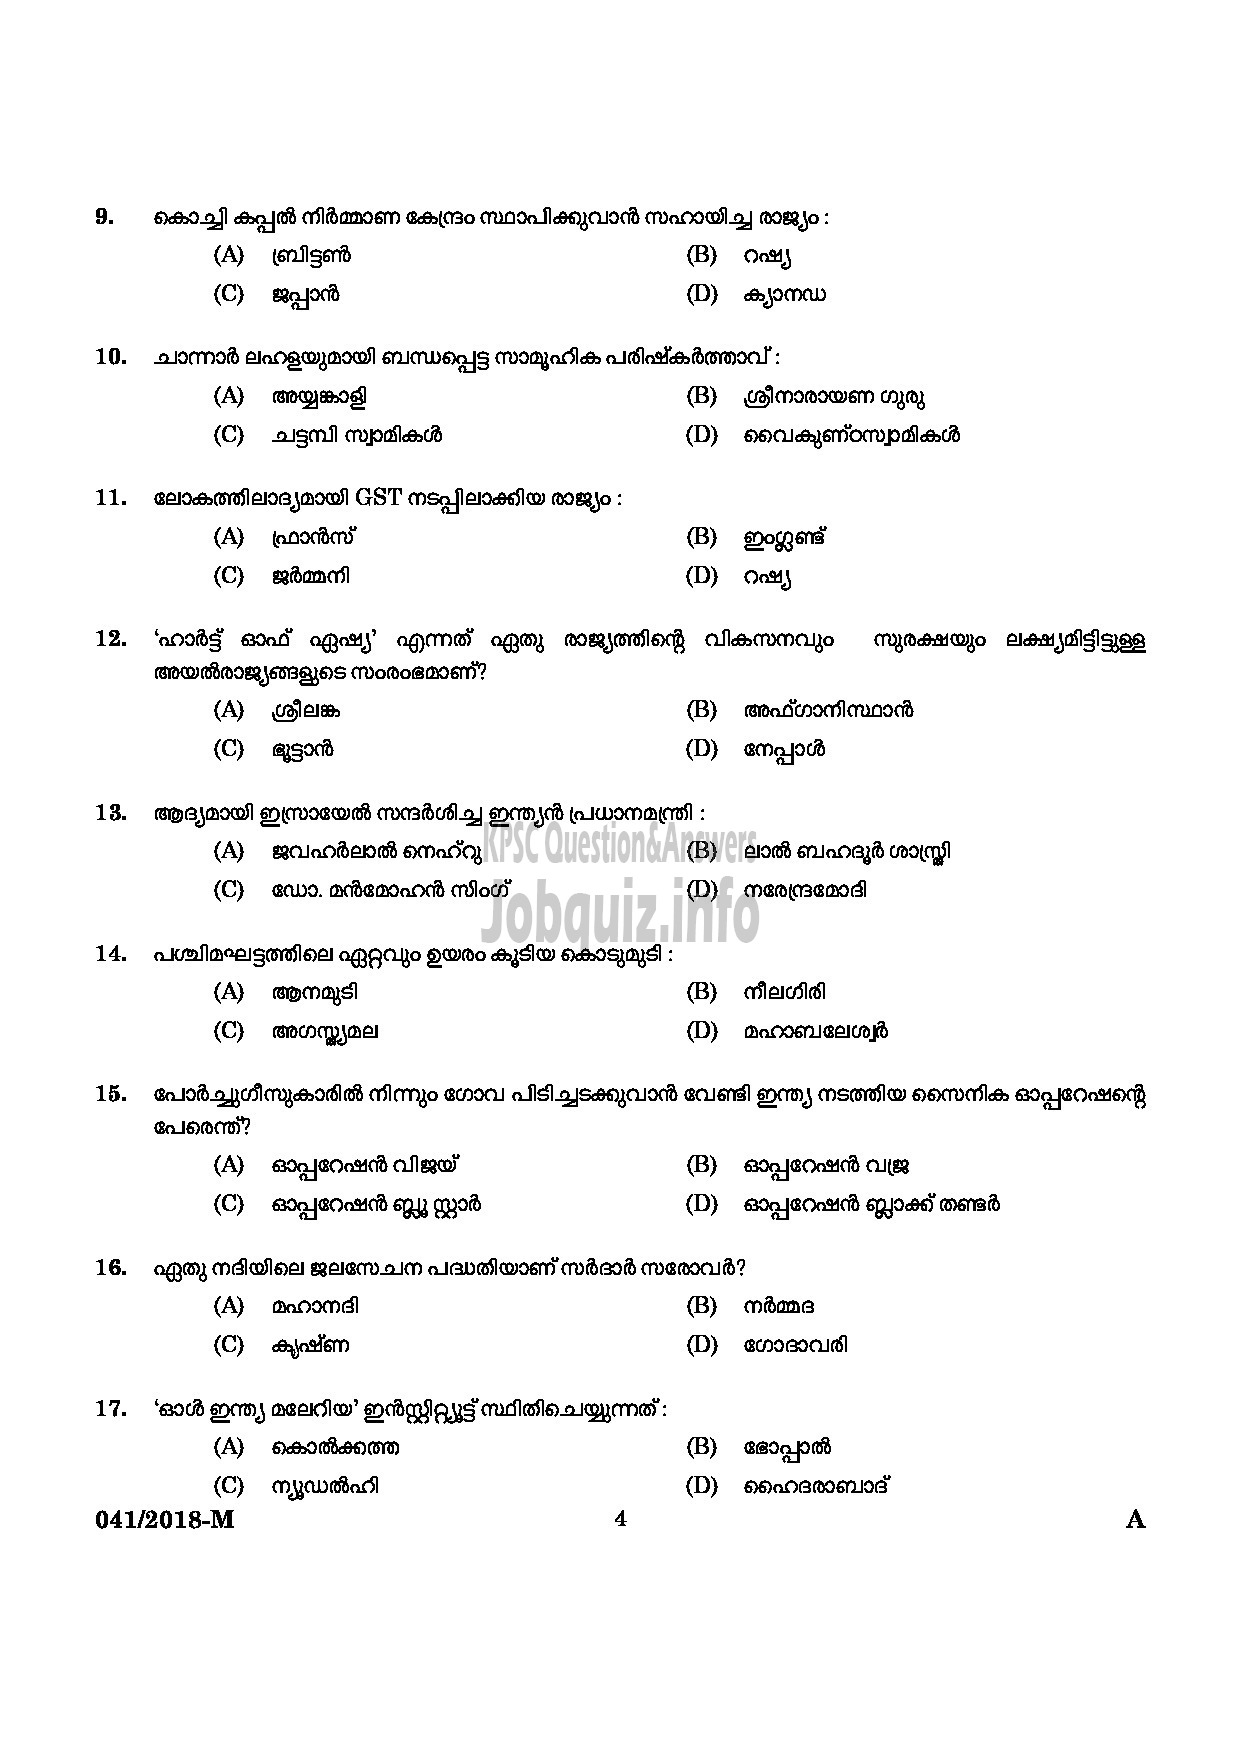 Kerala PSC Question Paper - WOMEN POLICE CONSTABLE NCA LC/AI AND MUSLIM POLICE MALAYALAM-2